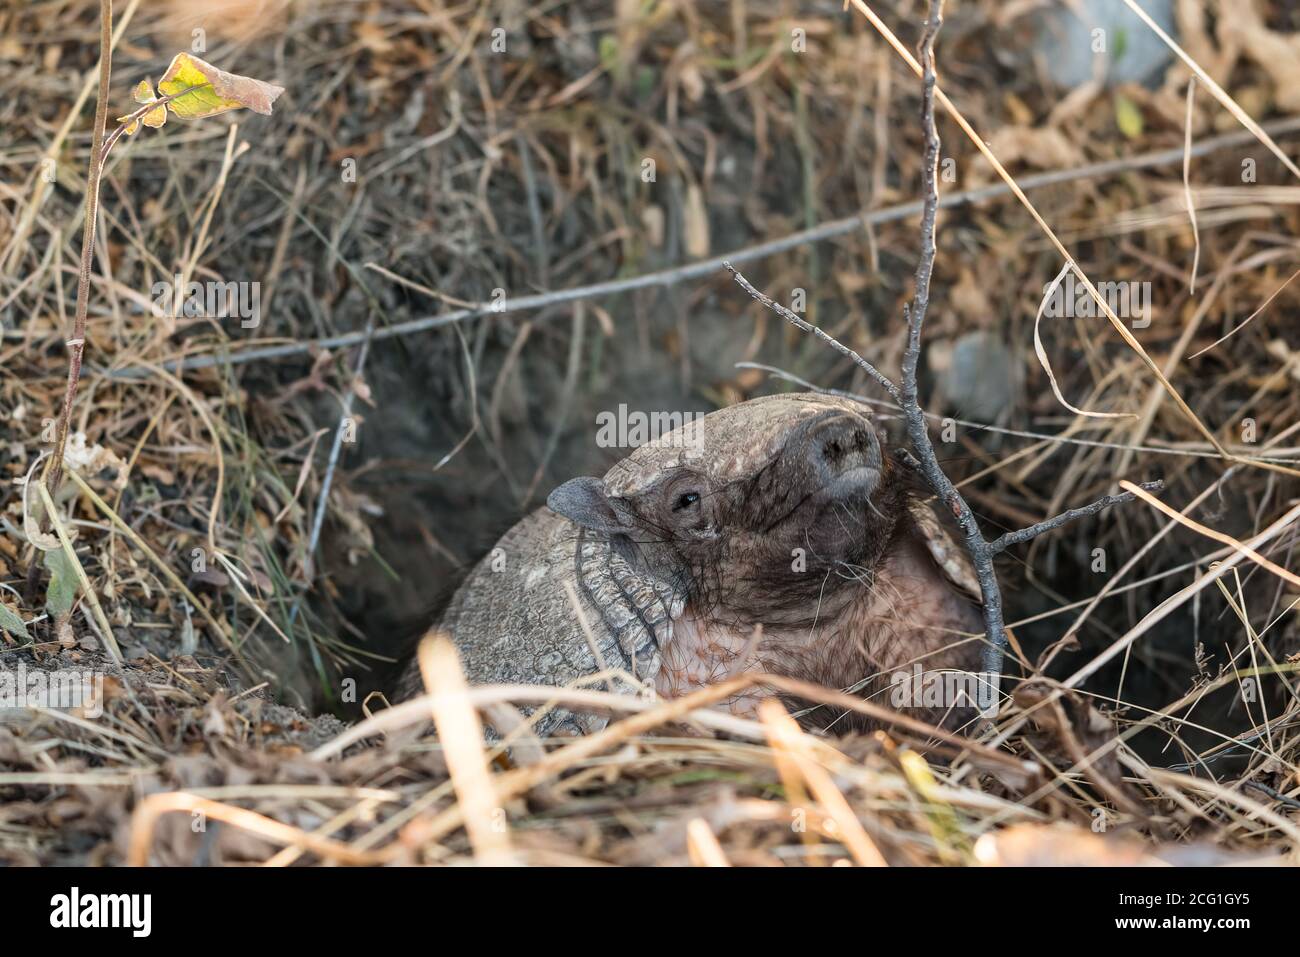 The Big Hairy Armadillo, Chaetophractus villosus, is the largest and most numerous of the armadillo species in South America.  Los Glaciares National Stock Photo